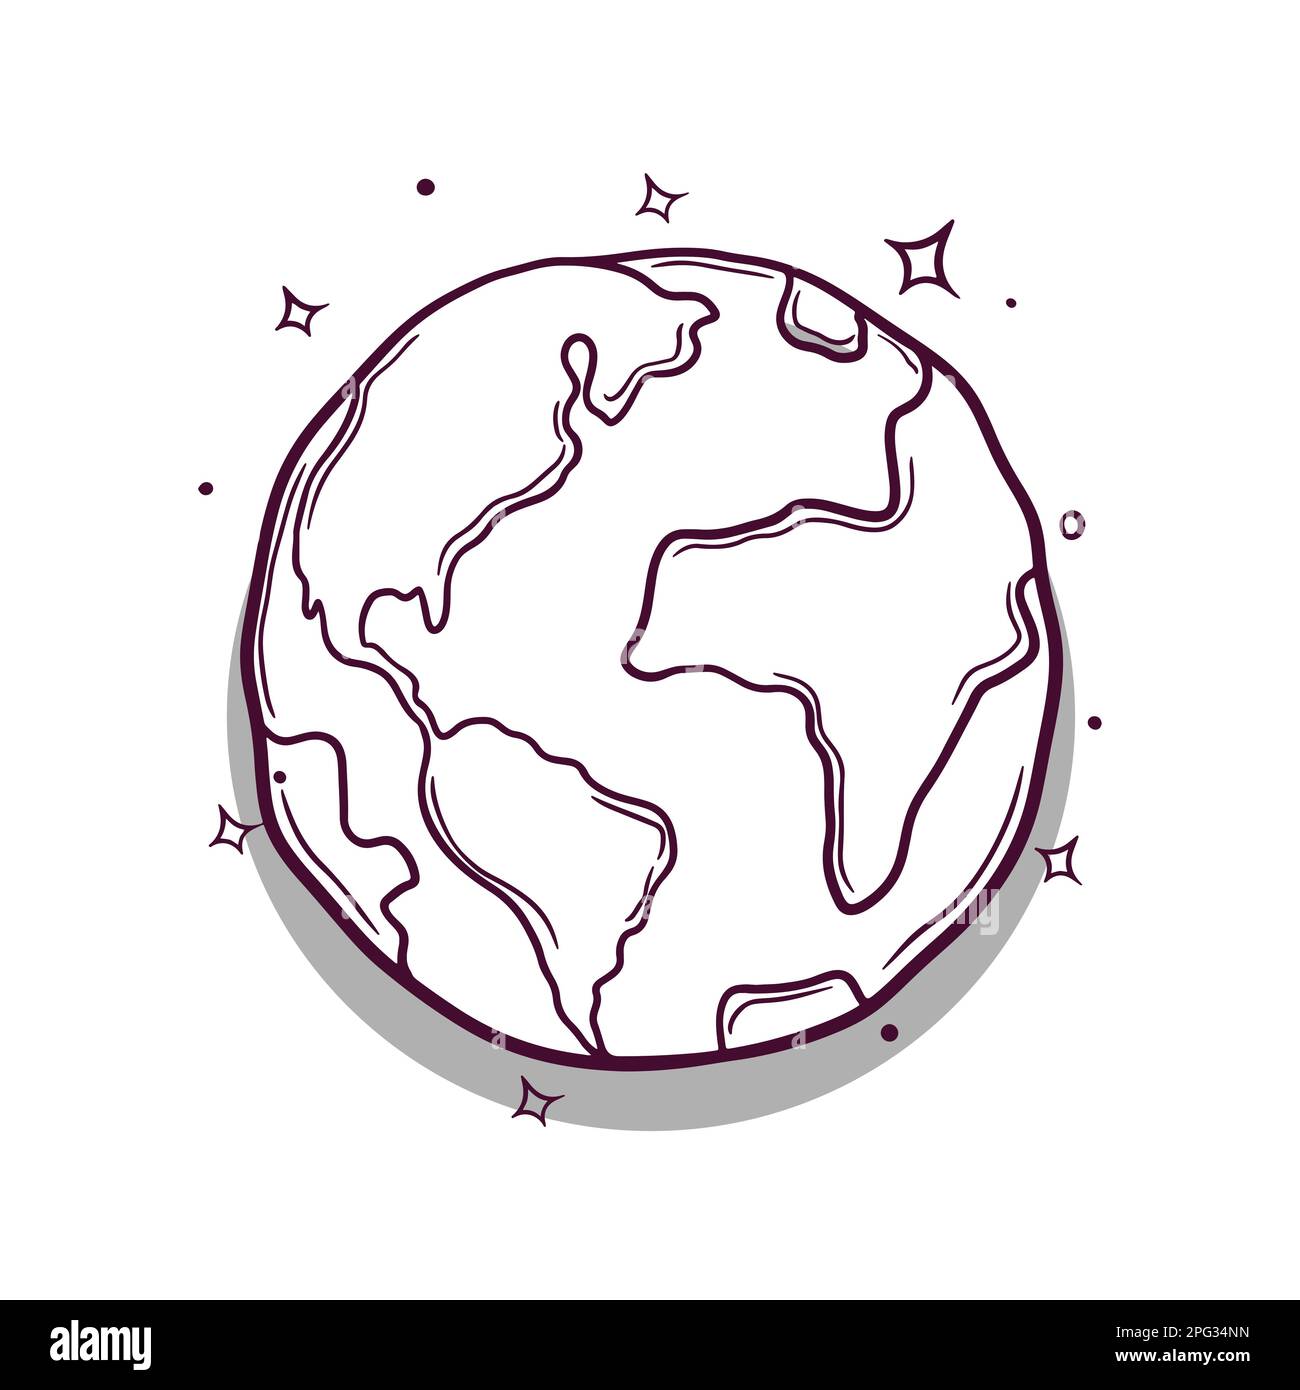 Hand Drawn Planet Earth Vector Illustration Stock Vector Image And Art Alamy 